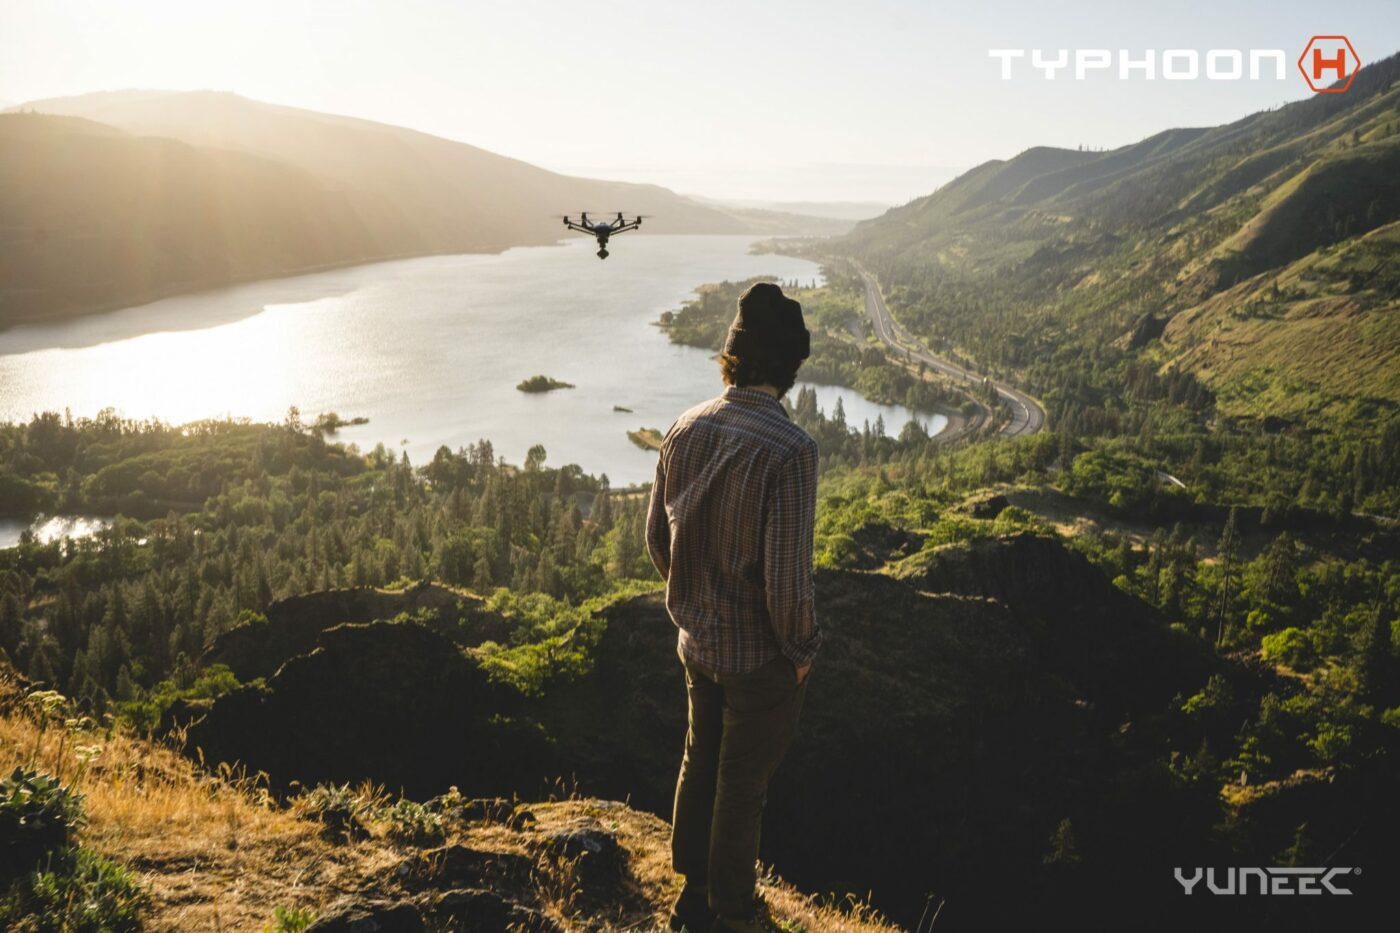 Yuneec Drone TYPHONE PRO 02 outdoor